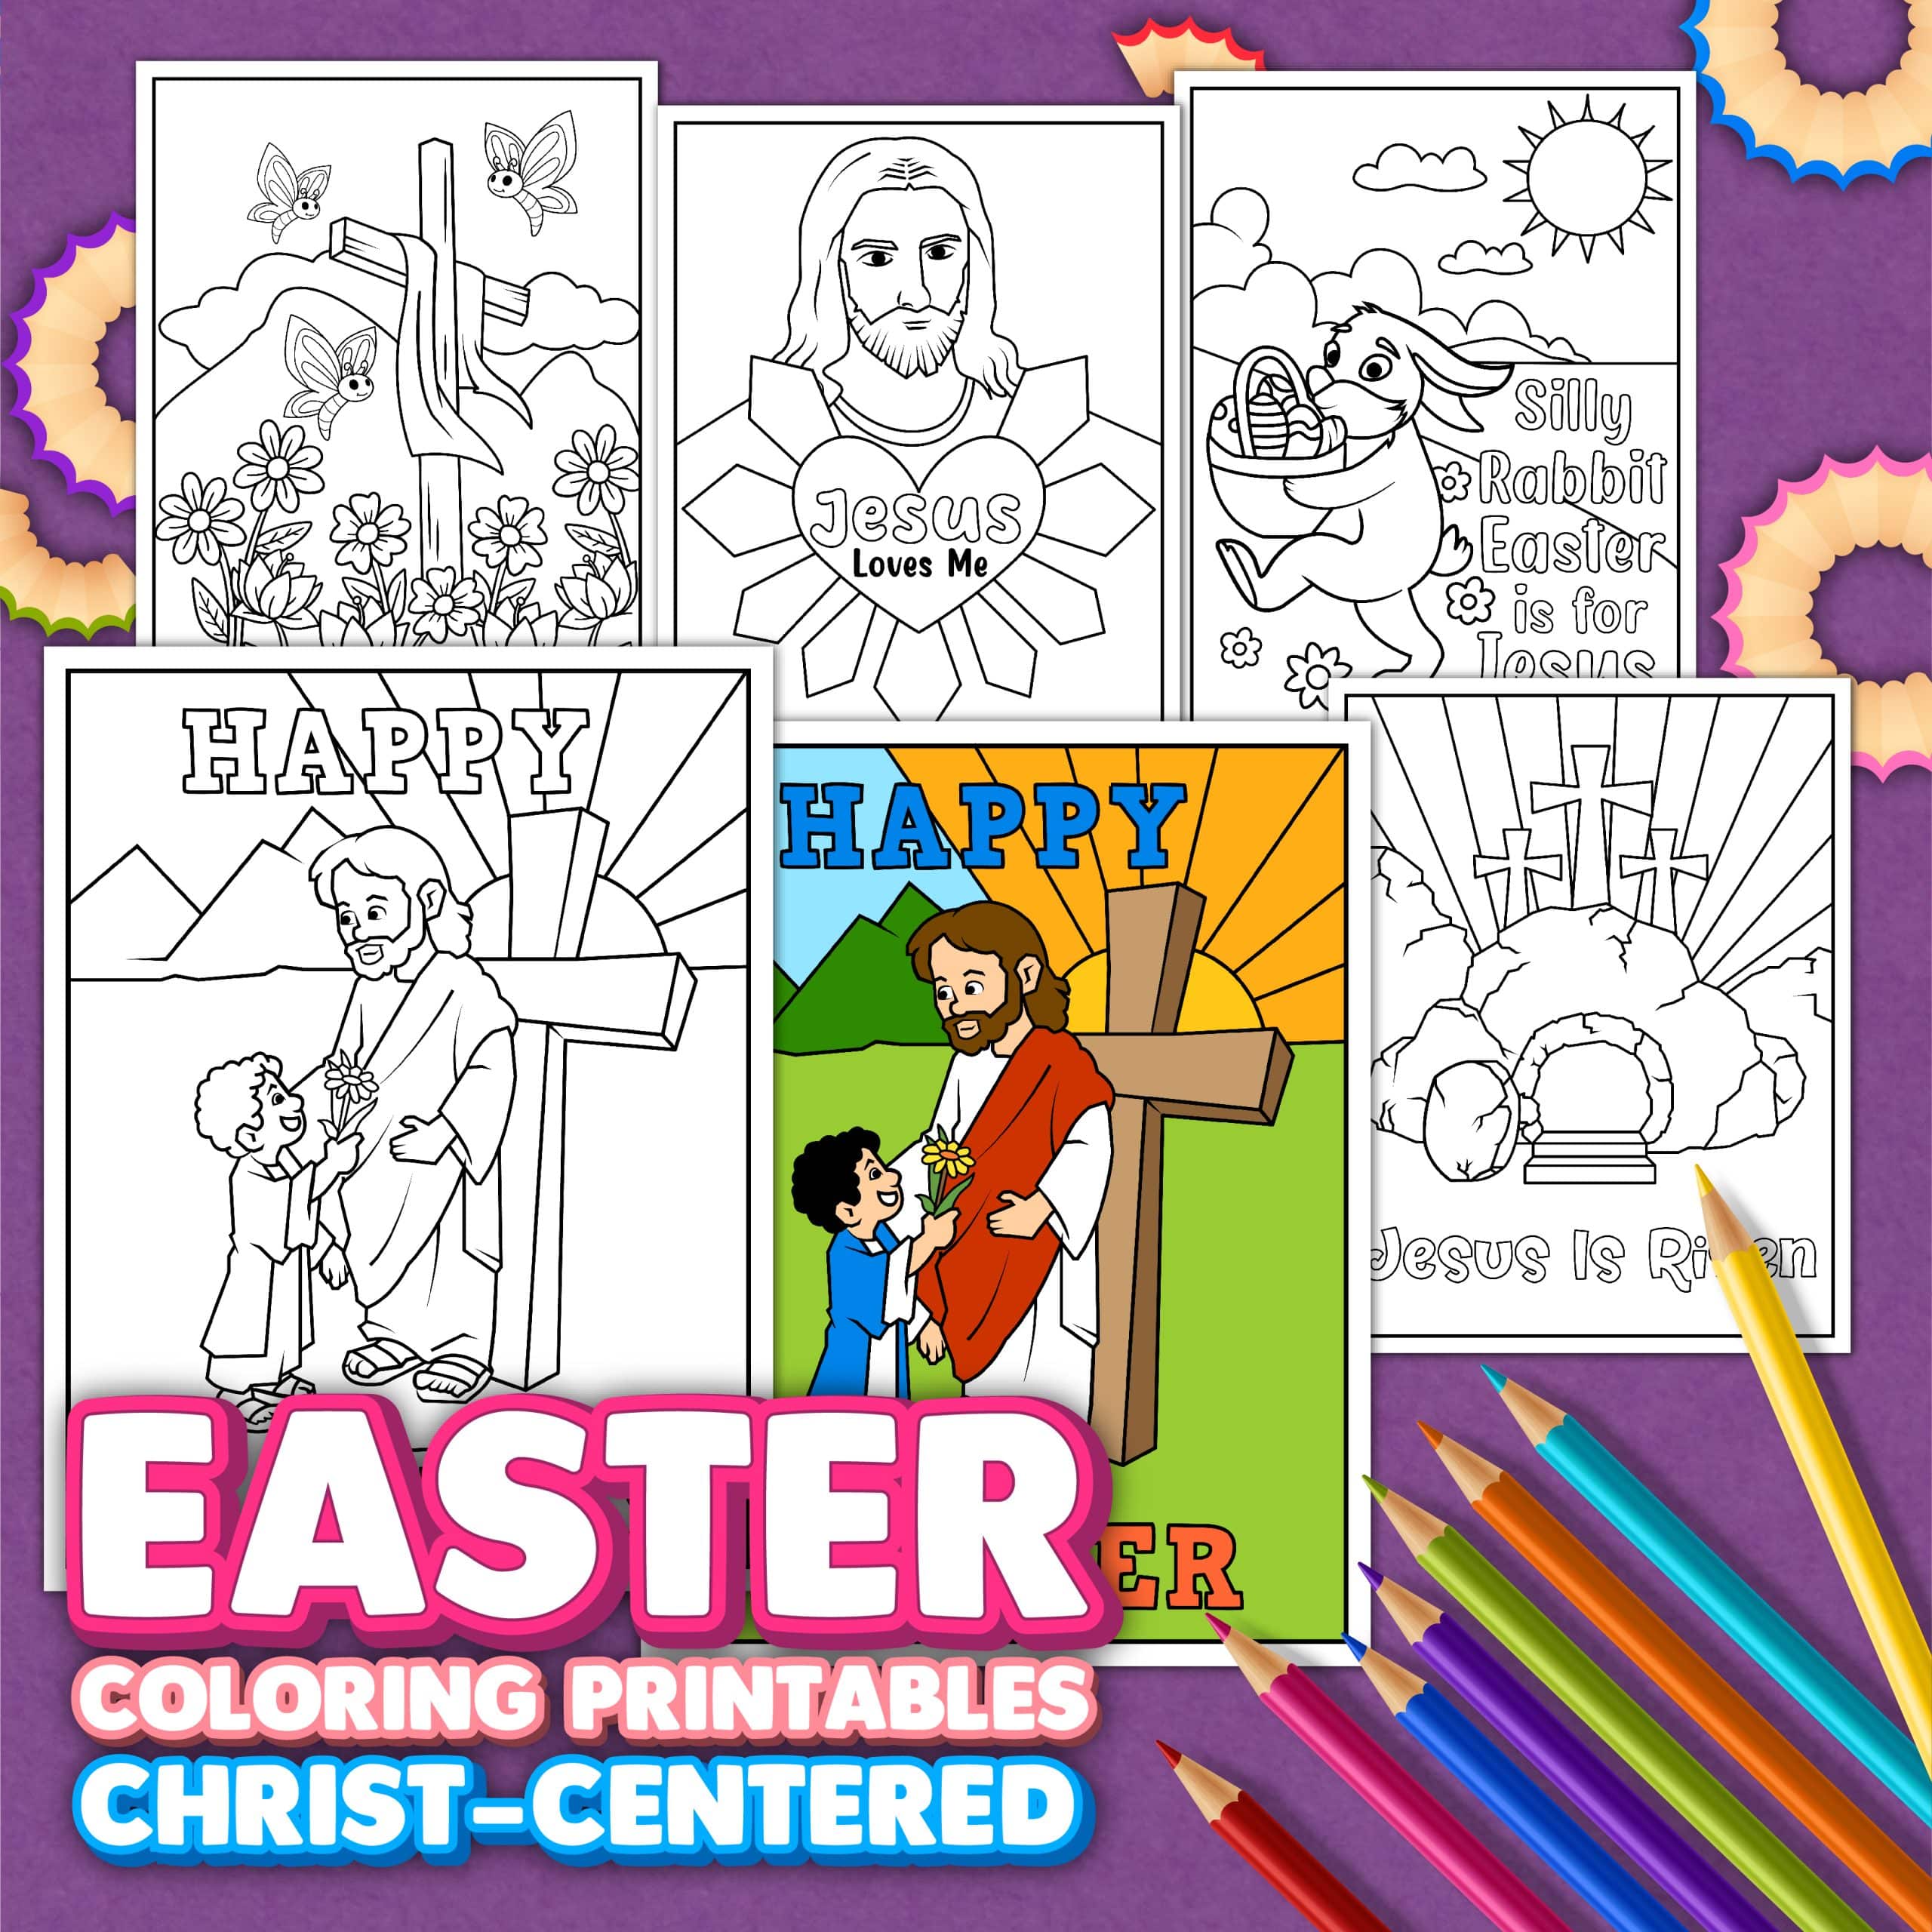 Christ-Centered Easter Coloring Pages (Free Printables)